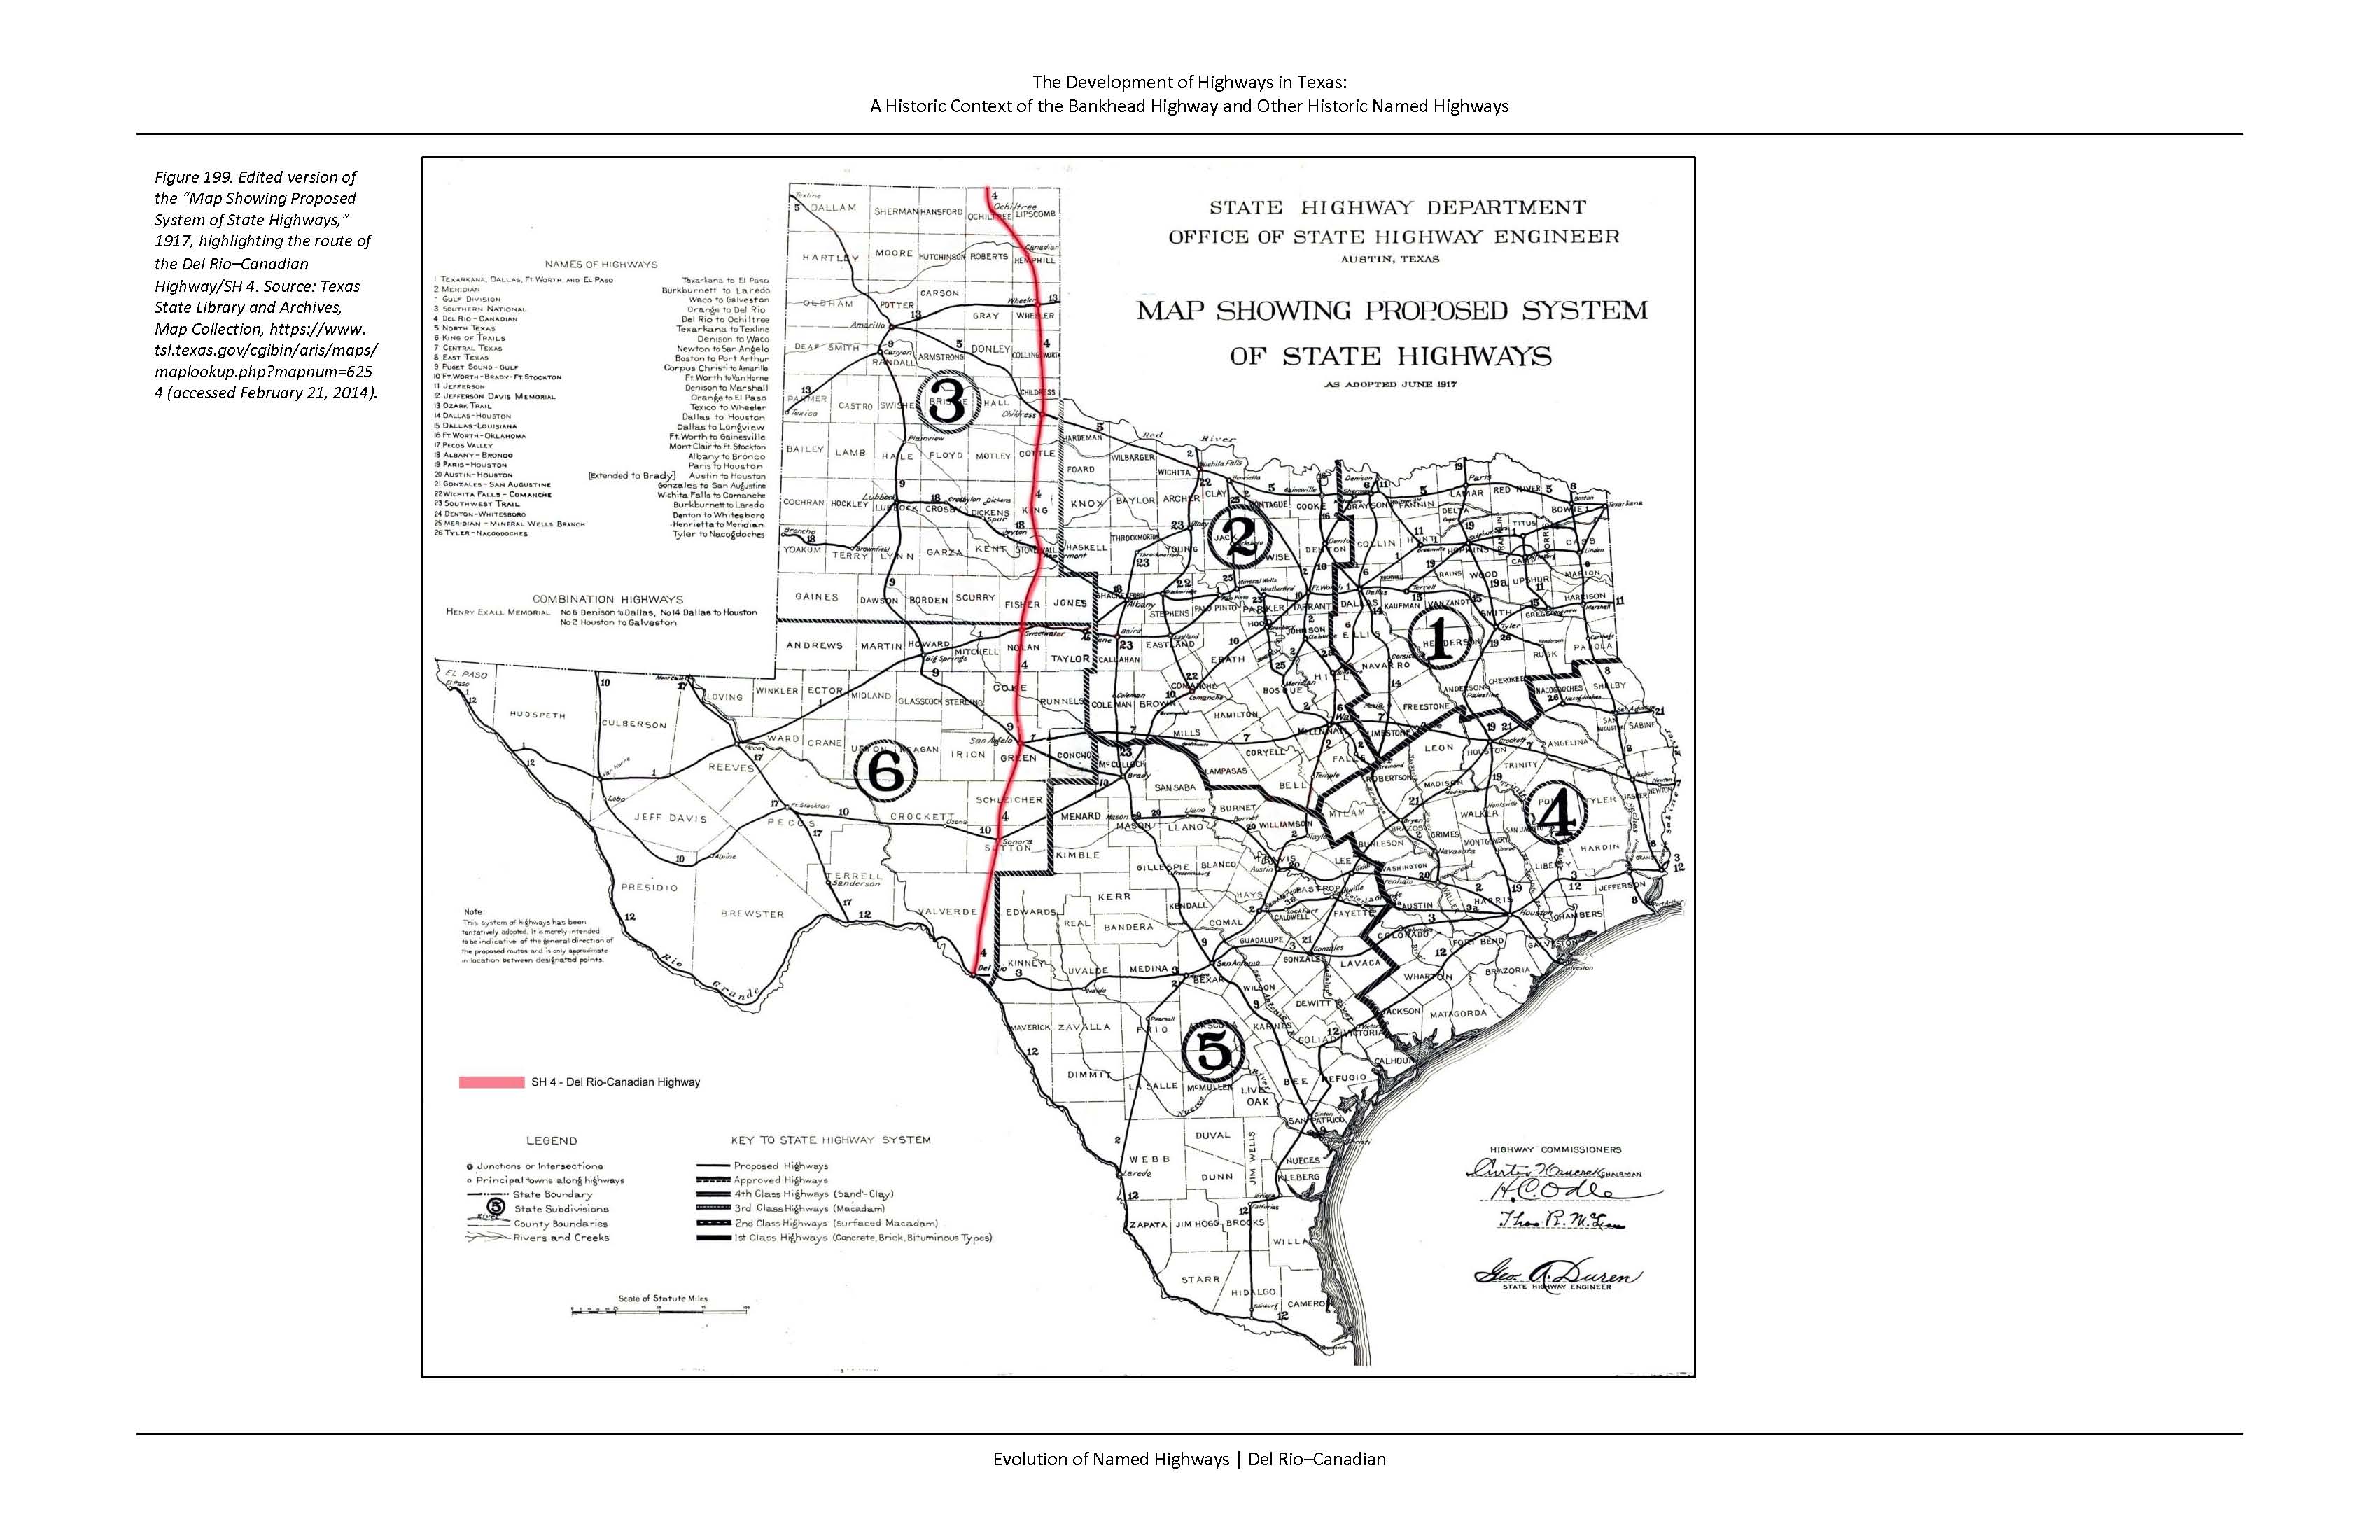 A black-and-white map of the Del Rio-Canadian Highway